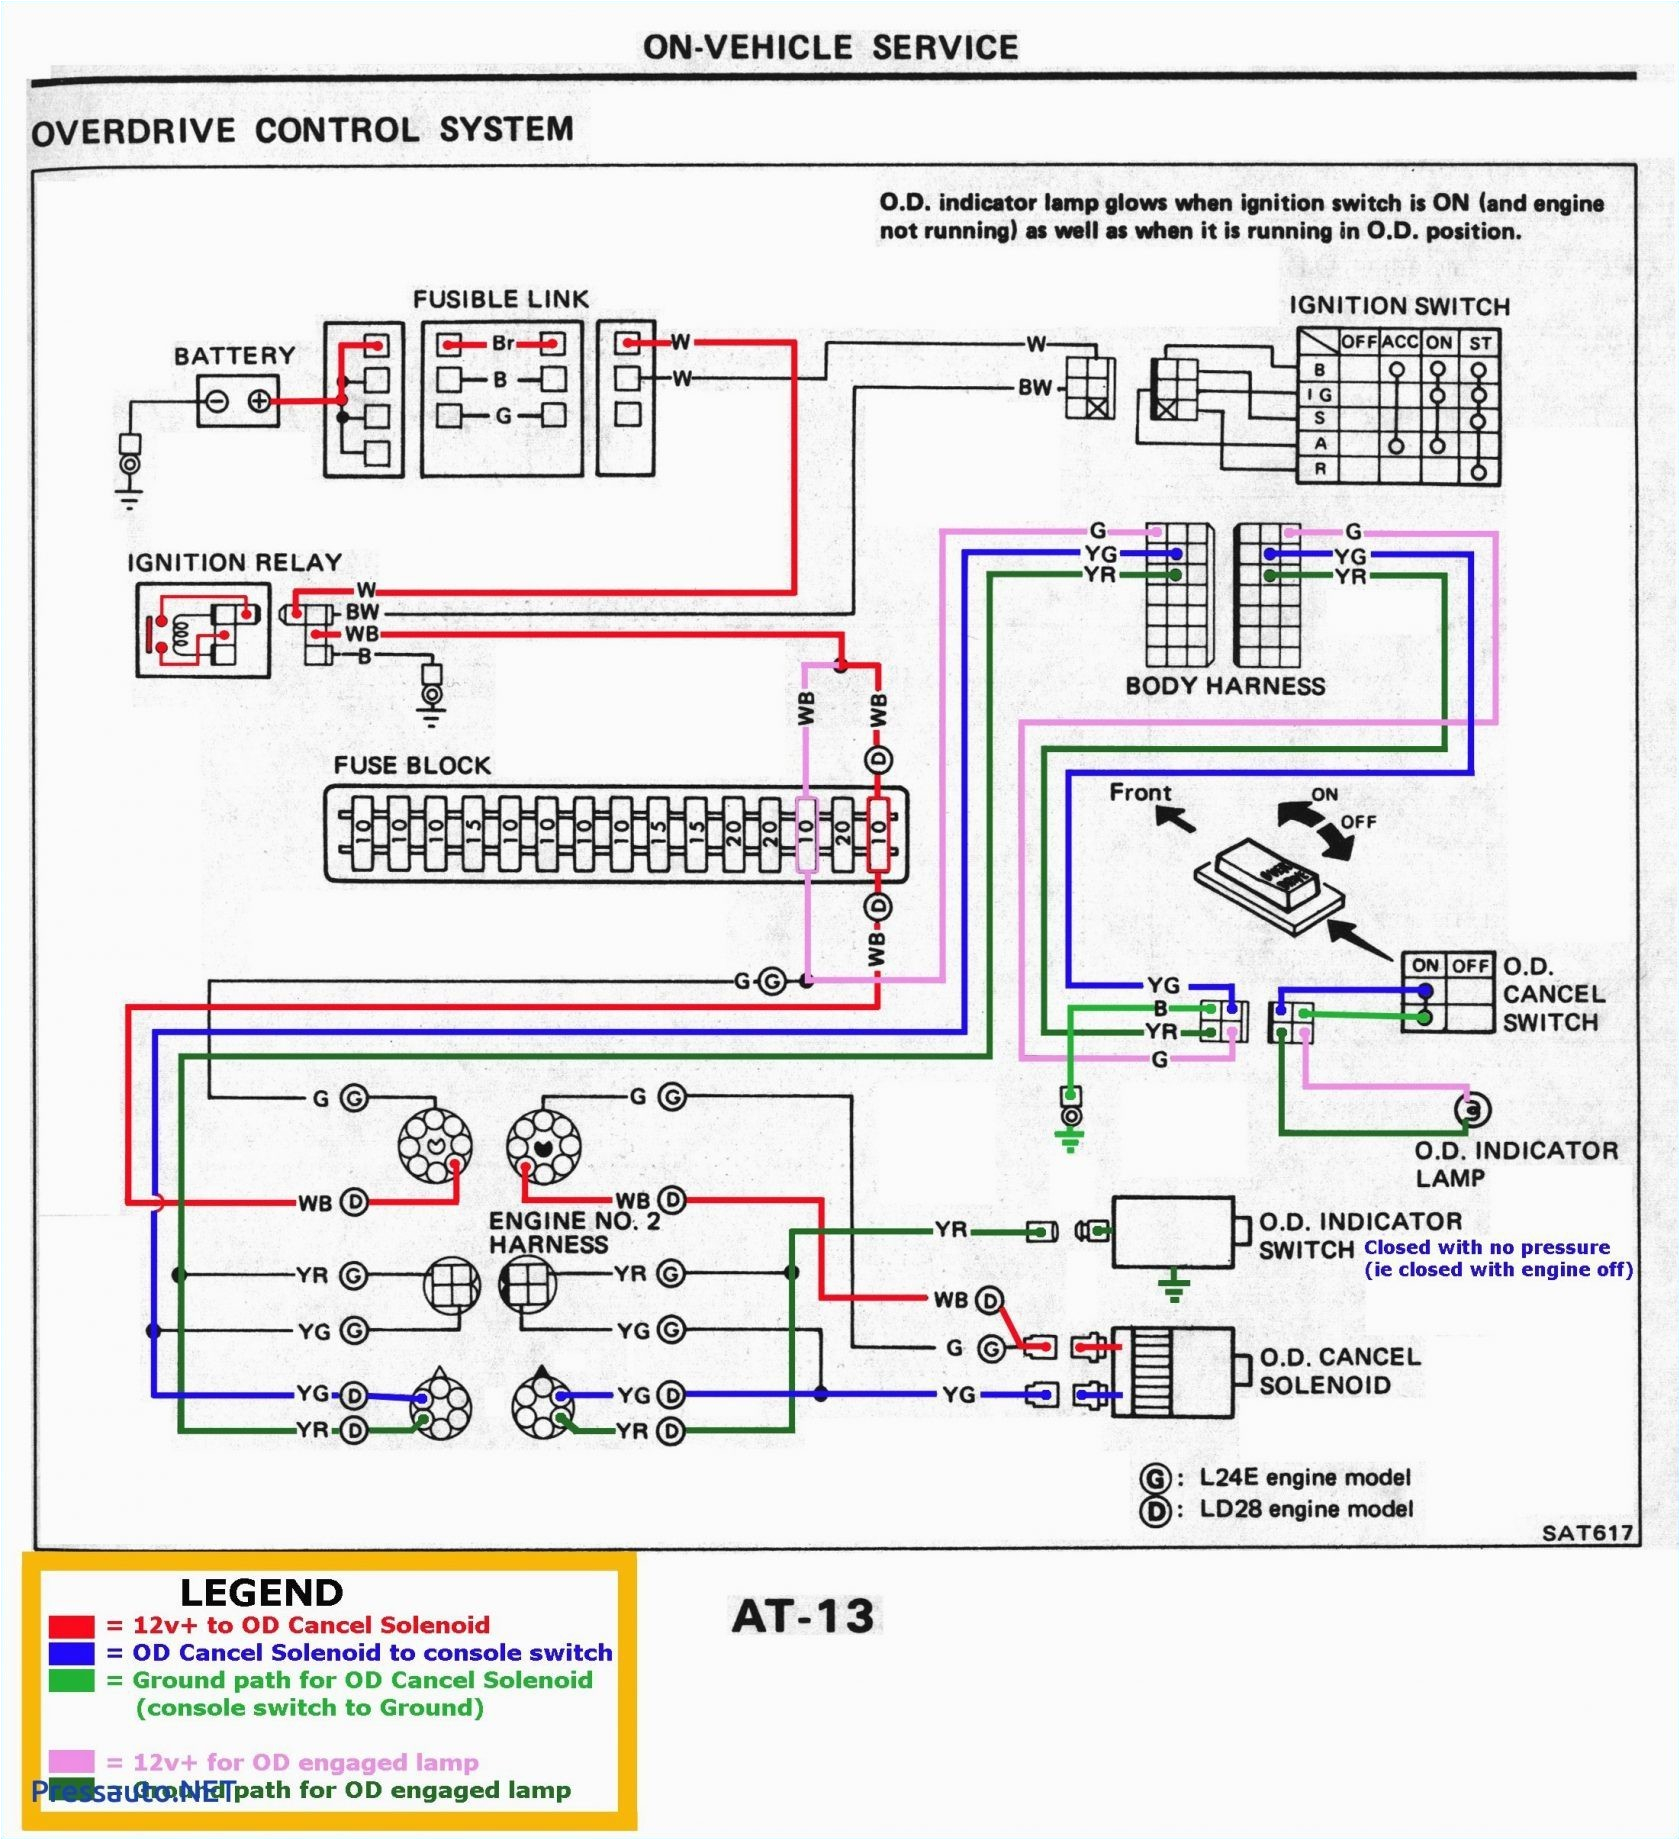 agm ignition switch wiring wiring diagram agm ignition switch wiring